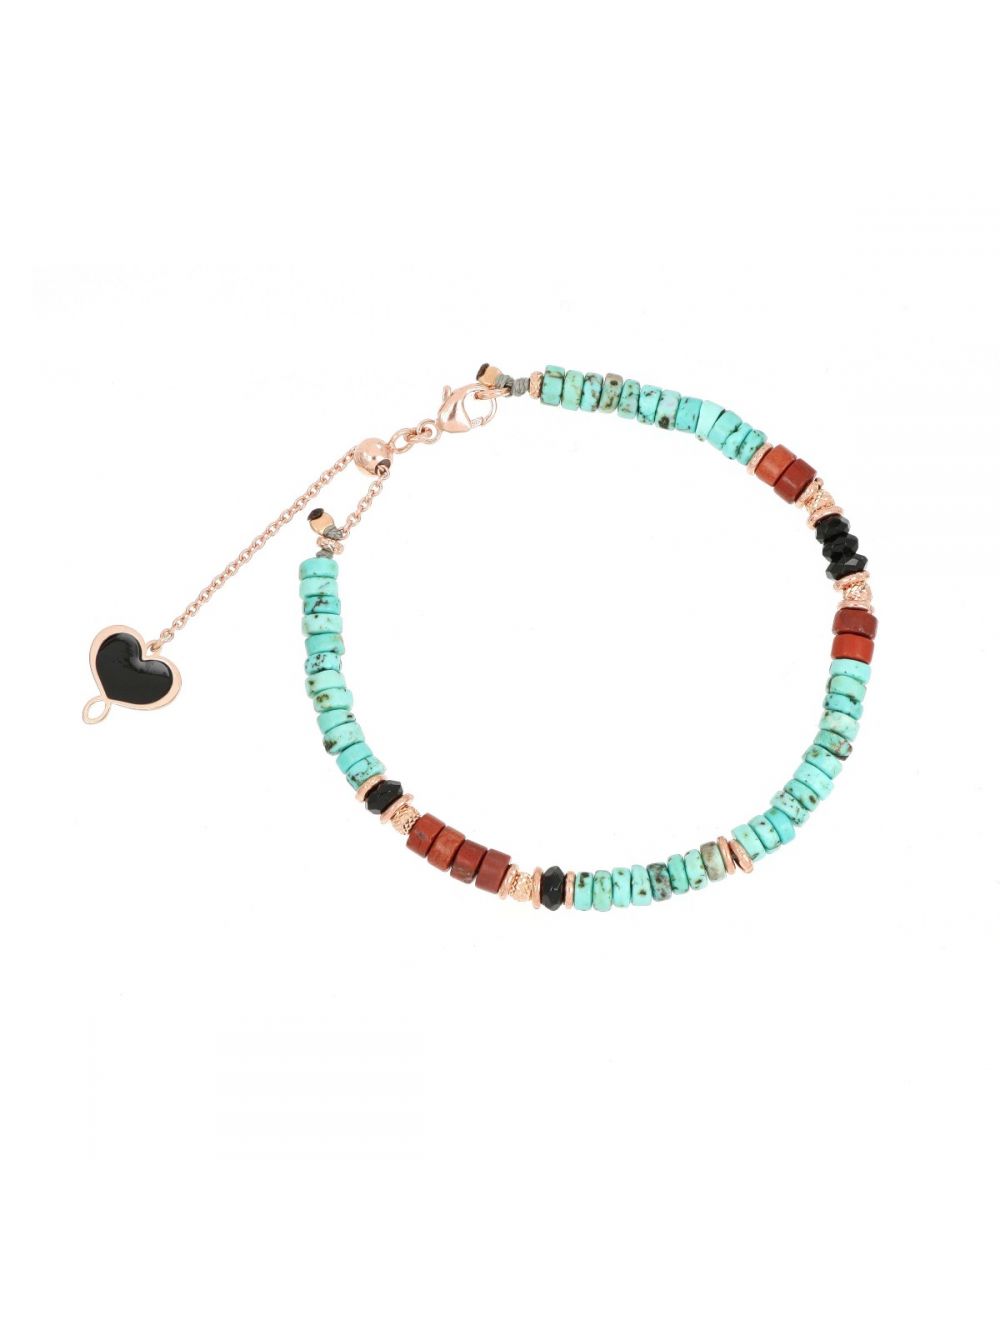 TURQUOISE AND RED BRACELET - BPUSAT